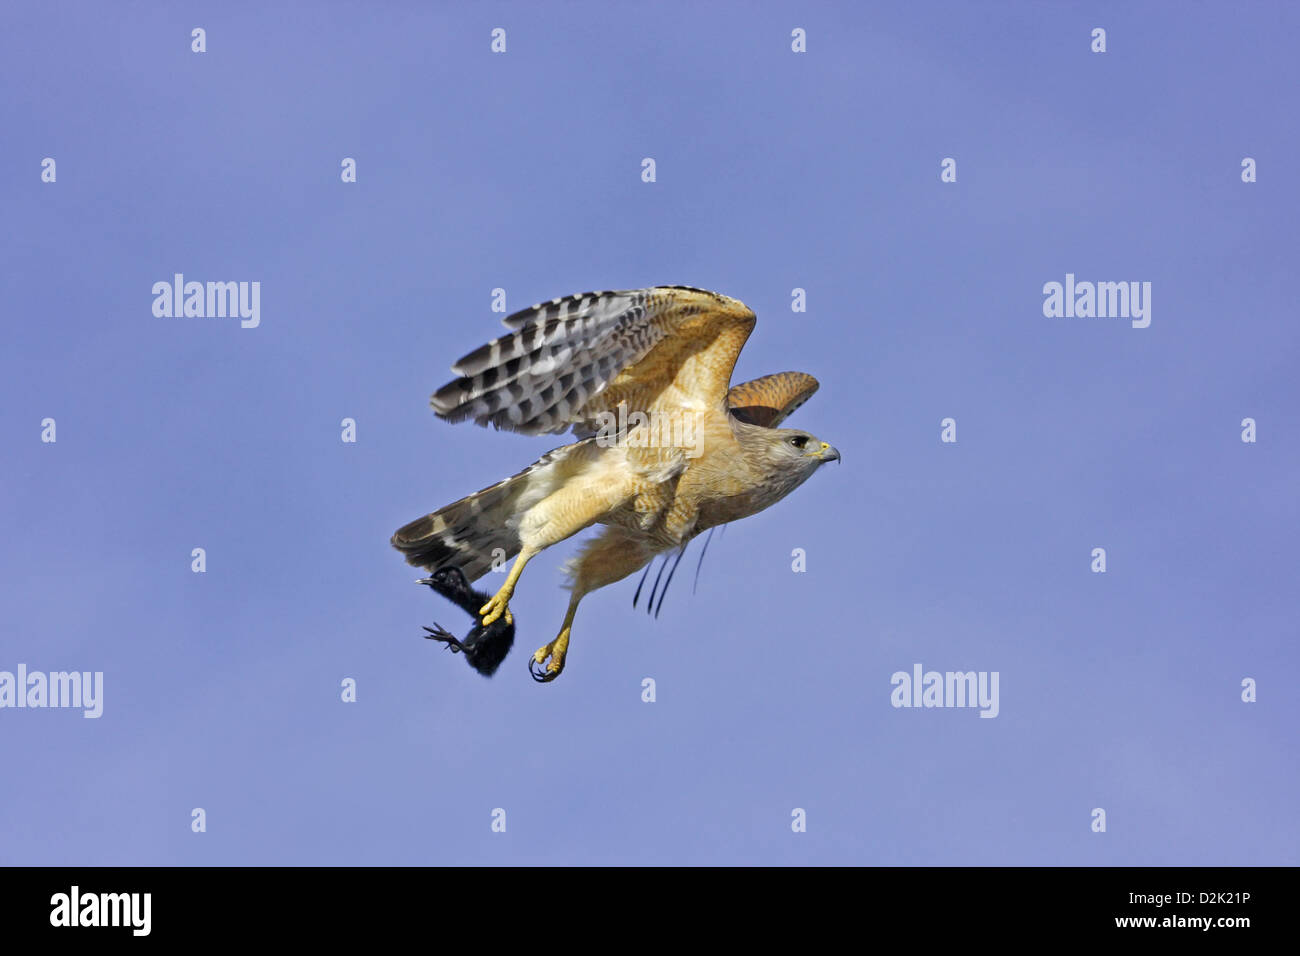 Red-shouldered Hawk (Buteo lineatus) flying with prey in its talons Stock Photo